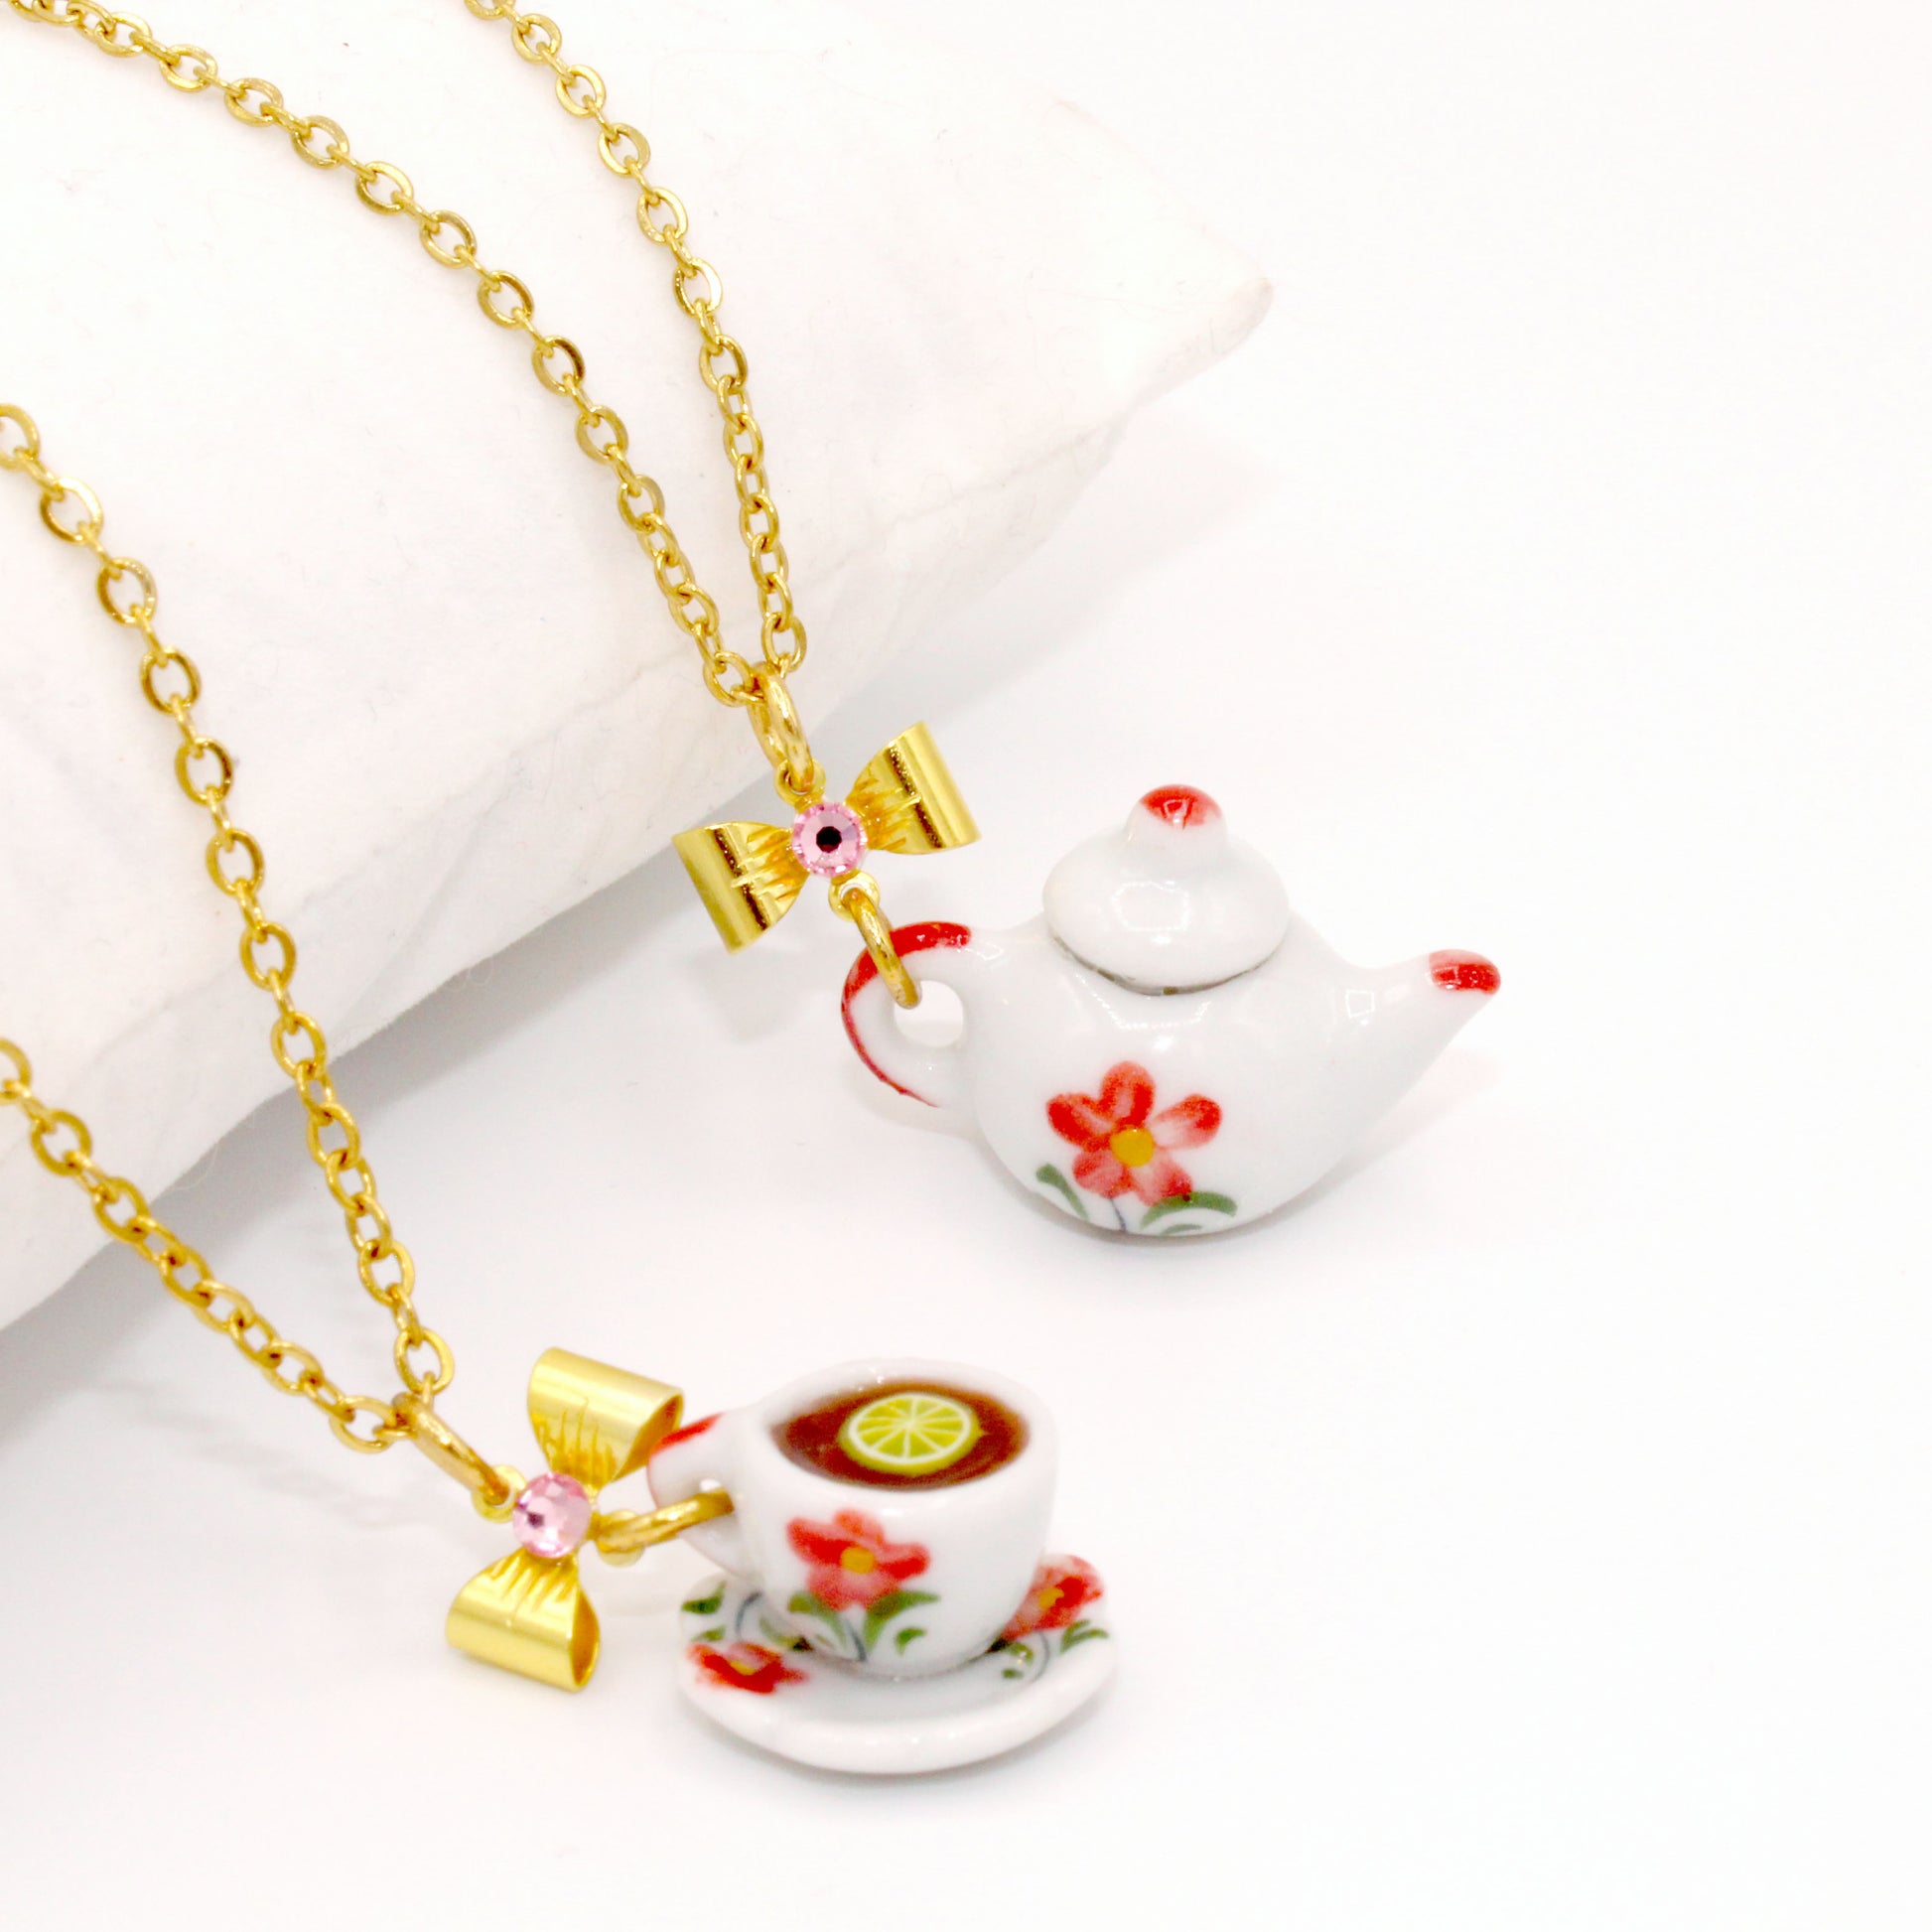 Victorian Revival Teacup Teapot Necklace High Tea Service Handmade Cute Charm Jewelry gift for women